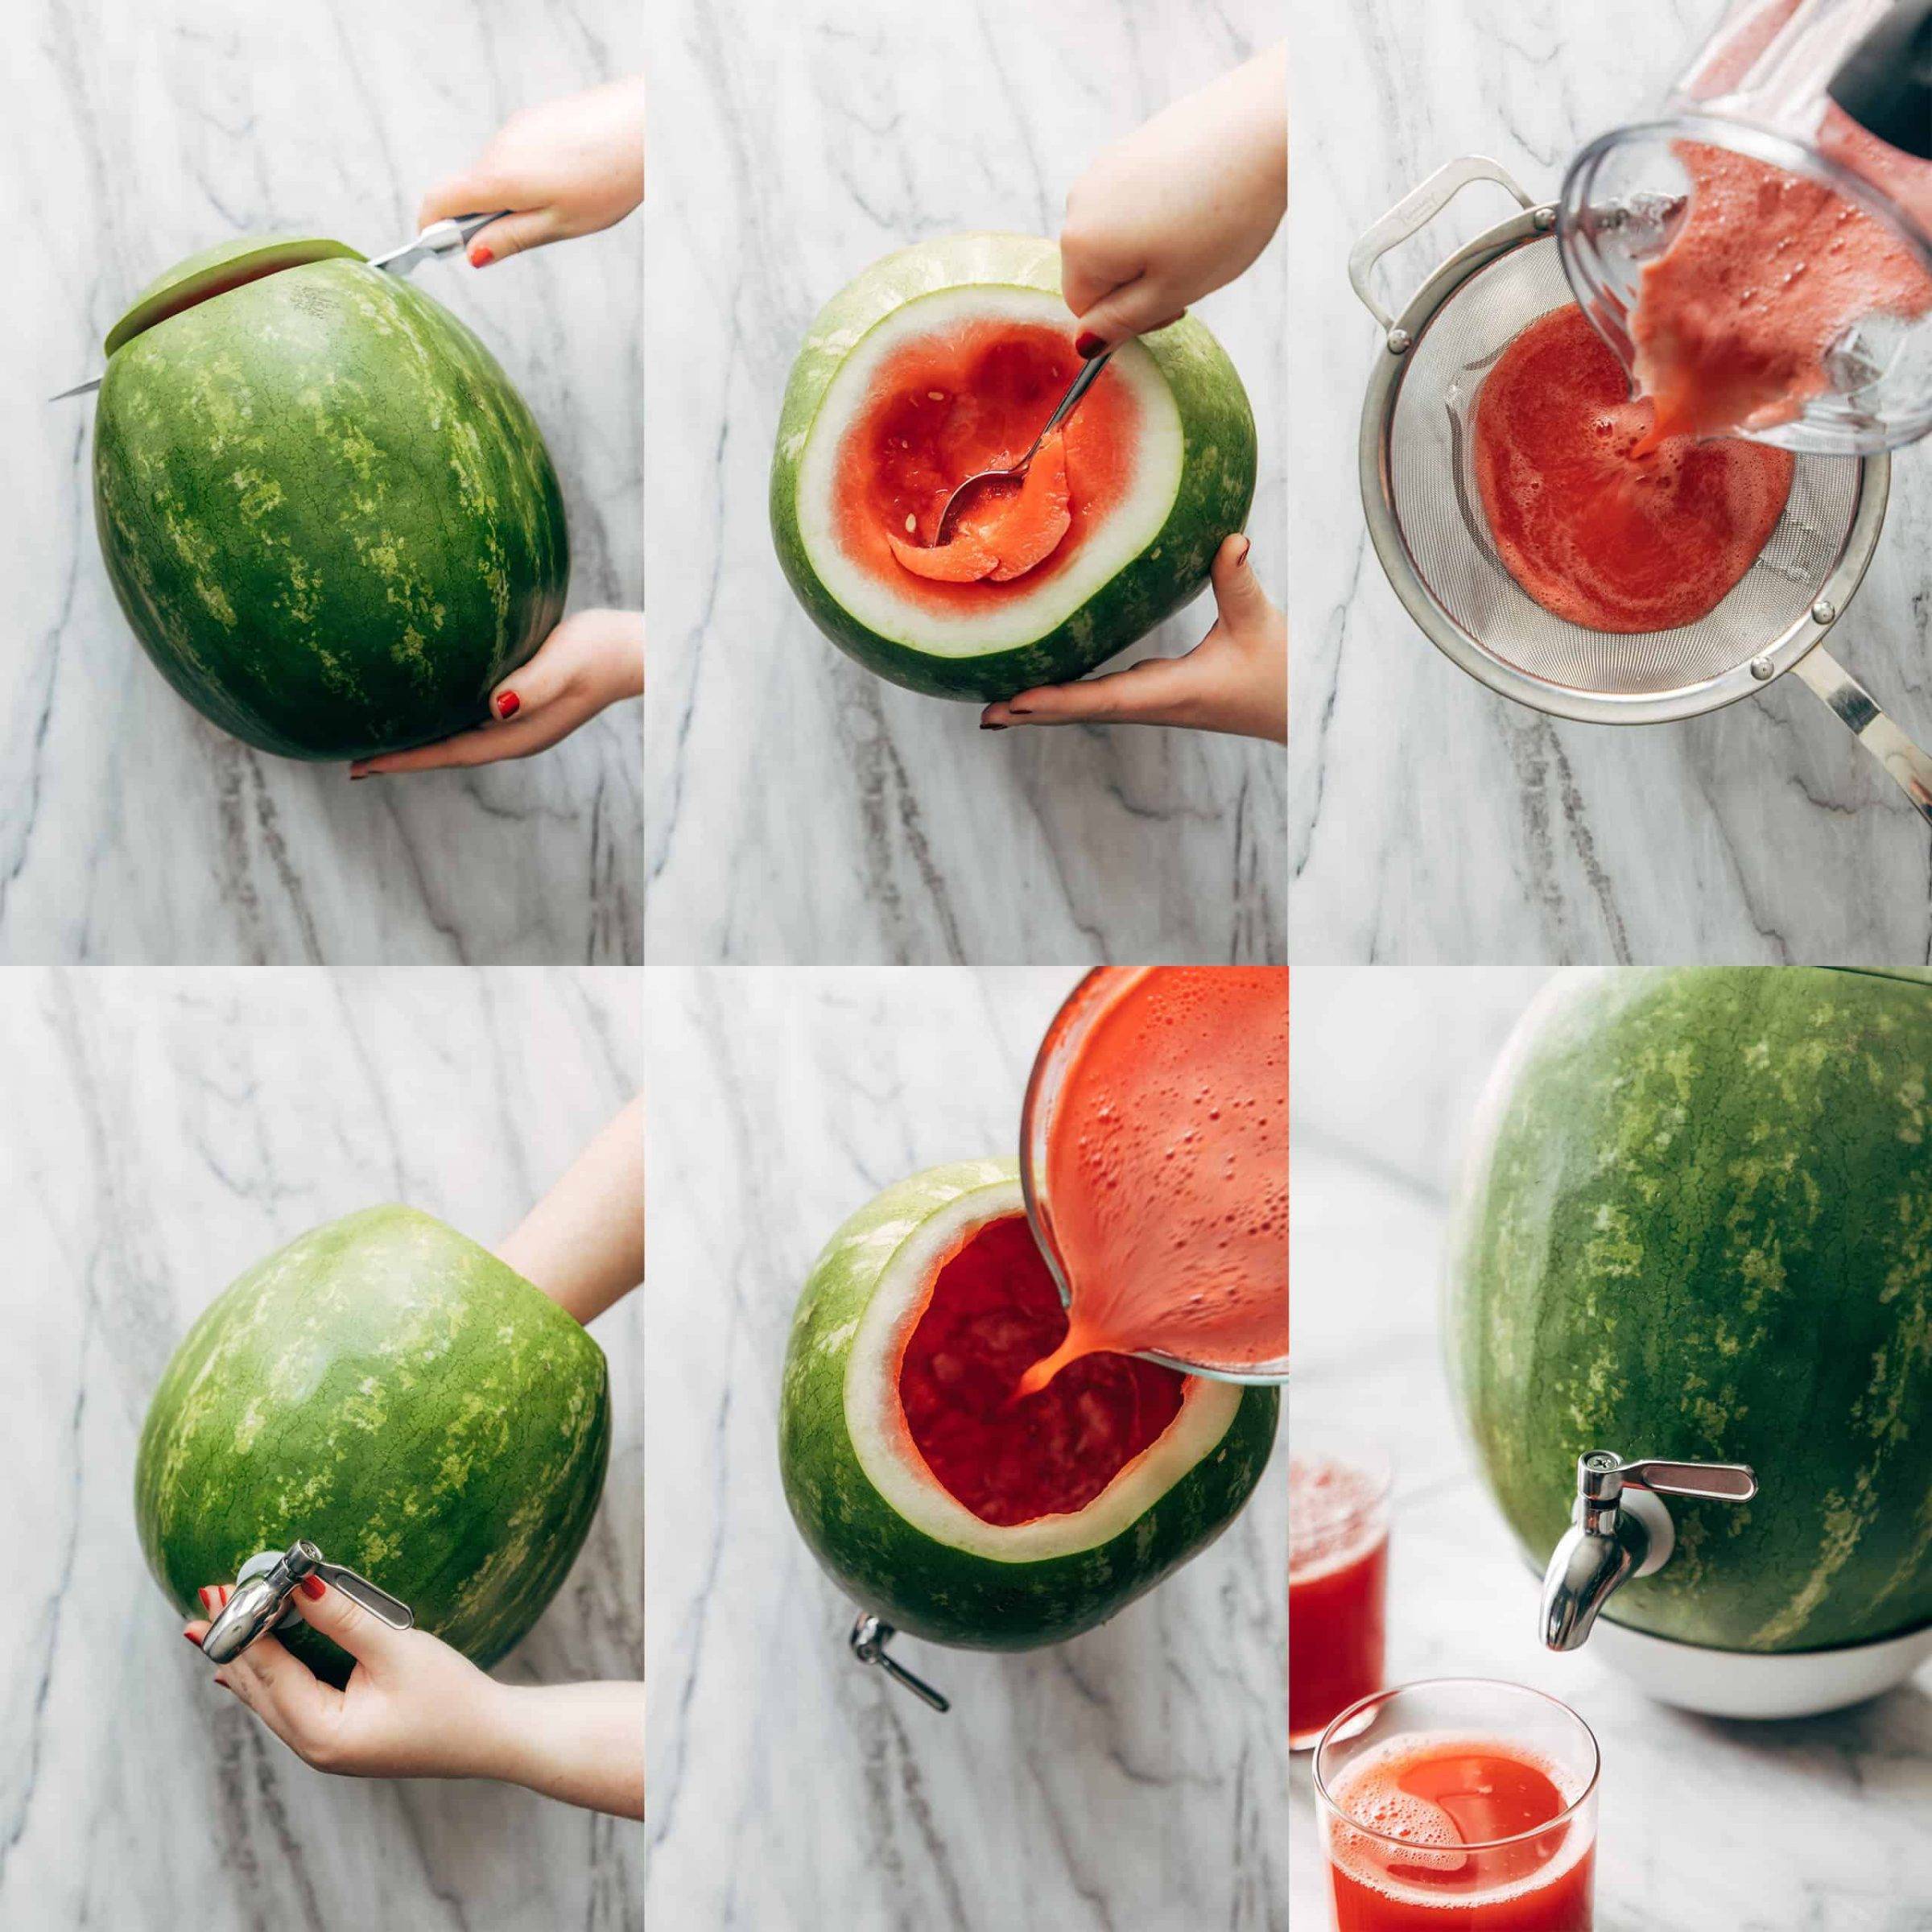 Collage showing how to cut a watermelon to make watermelon juice with a spigot. 